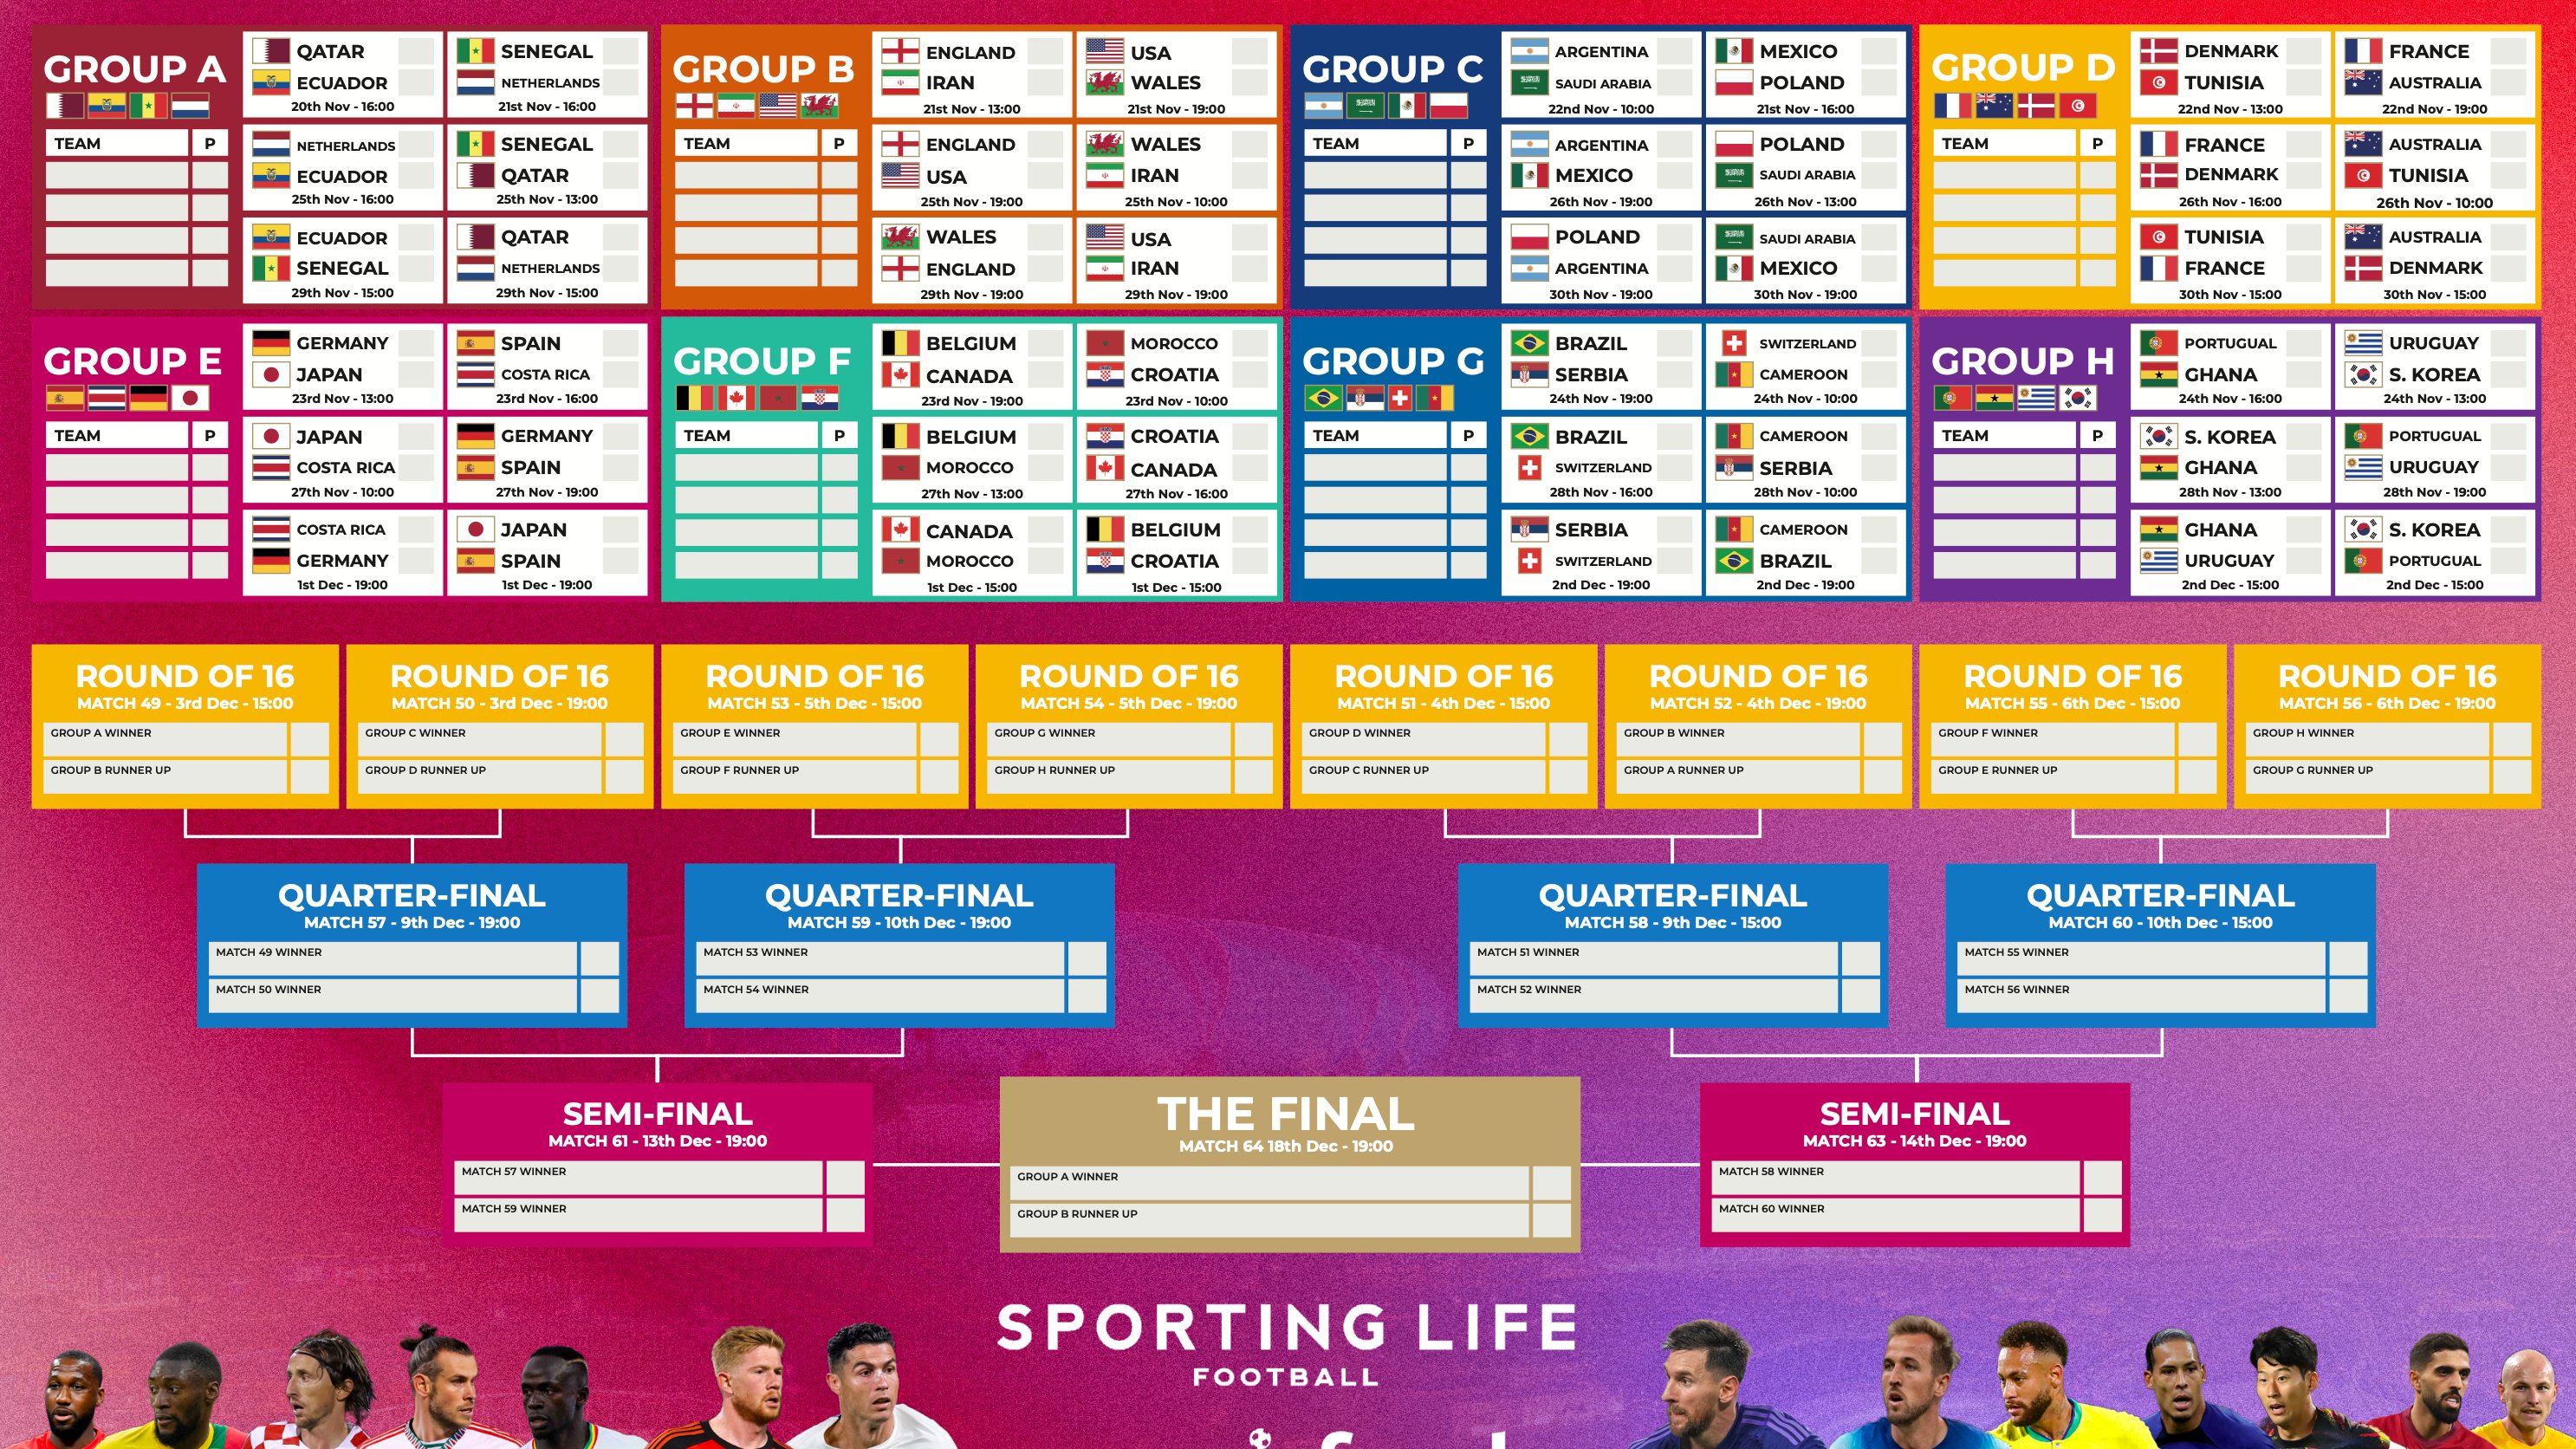 FIFA World Cup 2022 wallchart download free Englands route to the final predicted